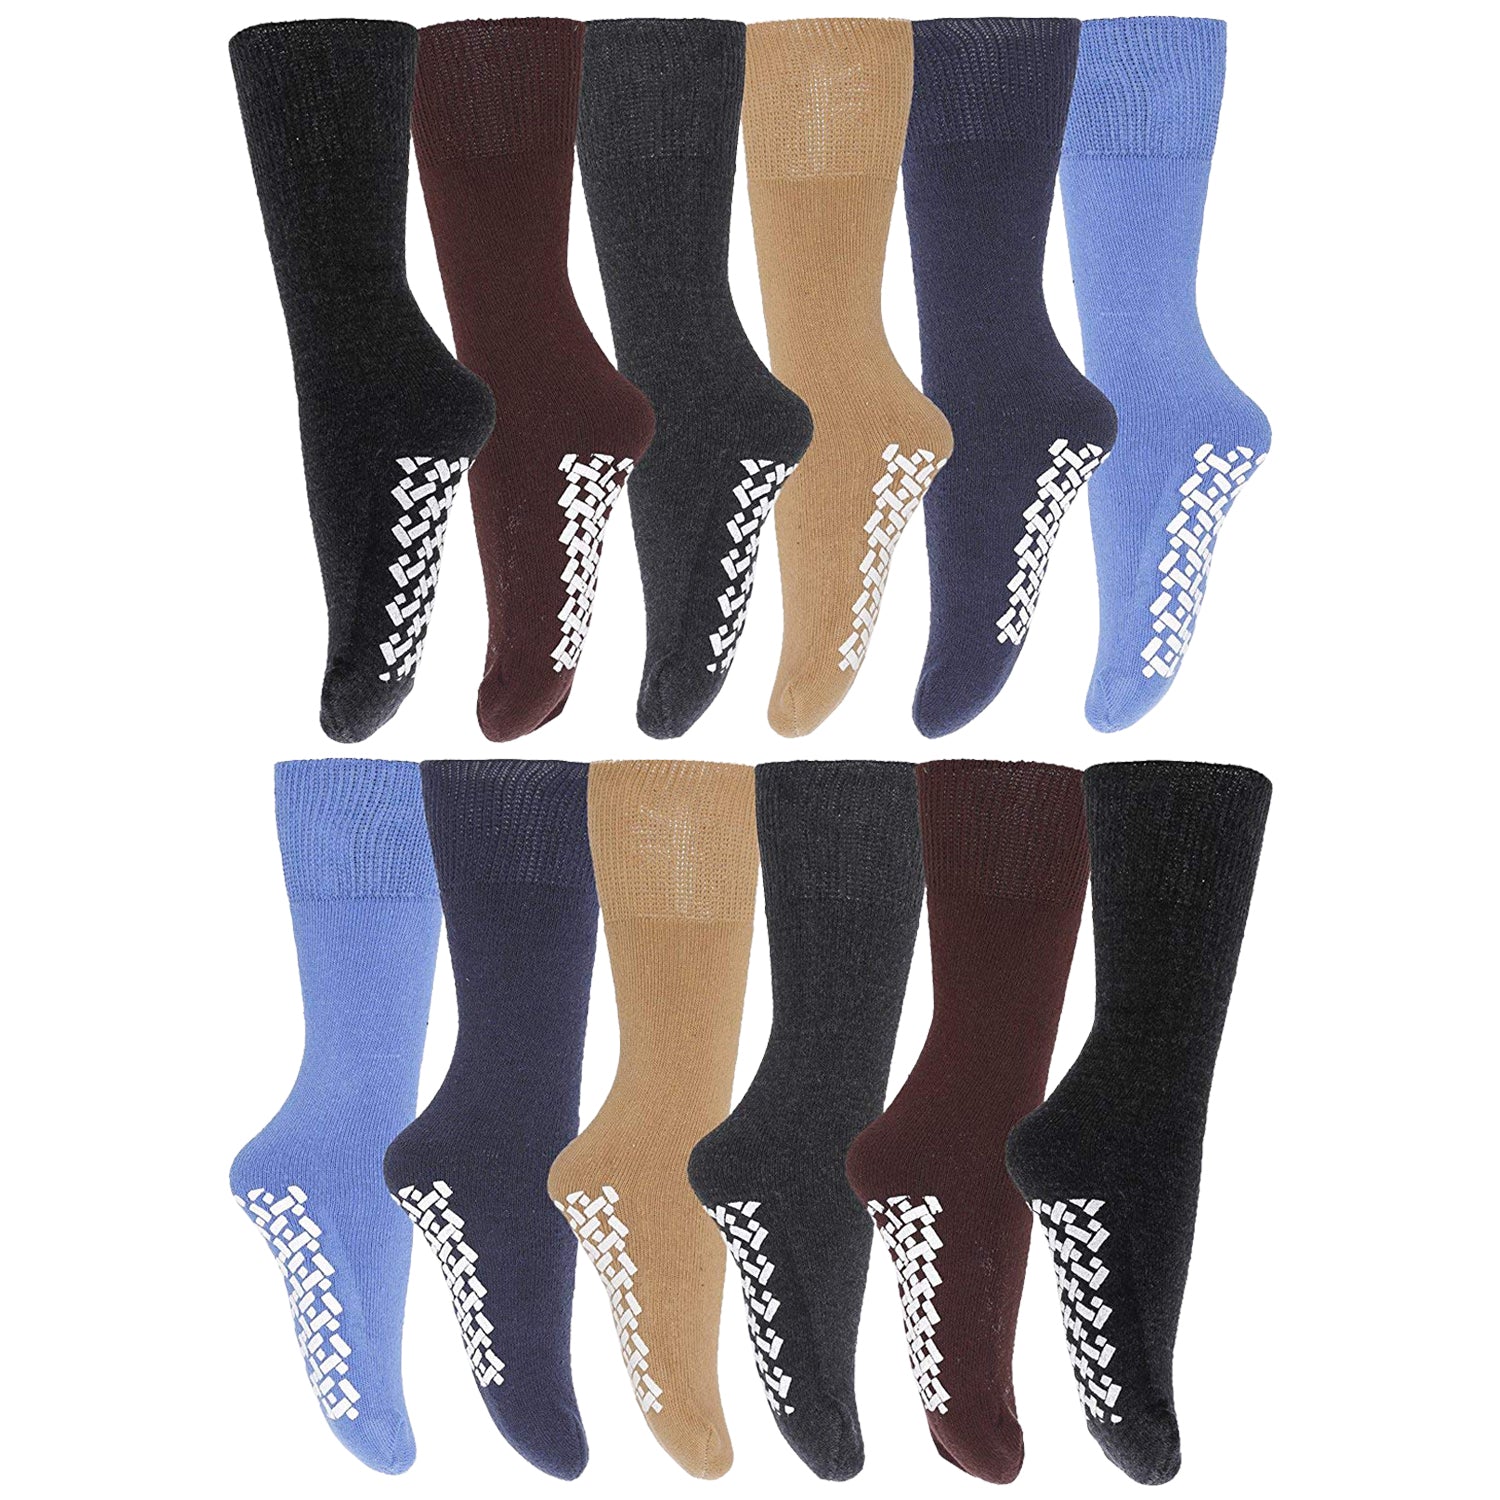 12 Pairs of Mens Non Skid/Slip Diabetic Medical Cotton Socks With